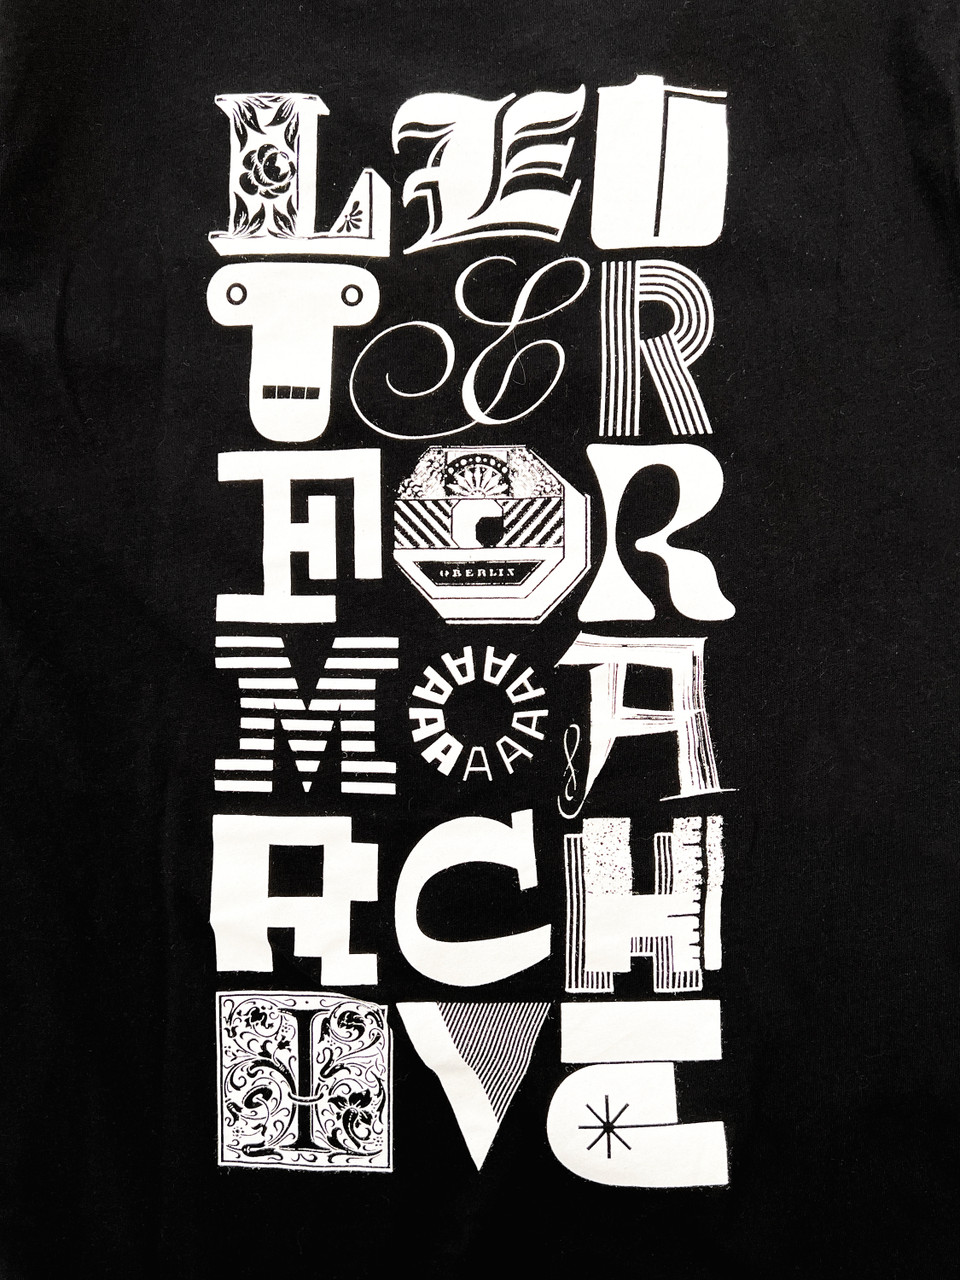 Photo of black t-shirt back with the words “LETTERFORM ARCHIVE” in three columns of letters from various sources.